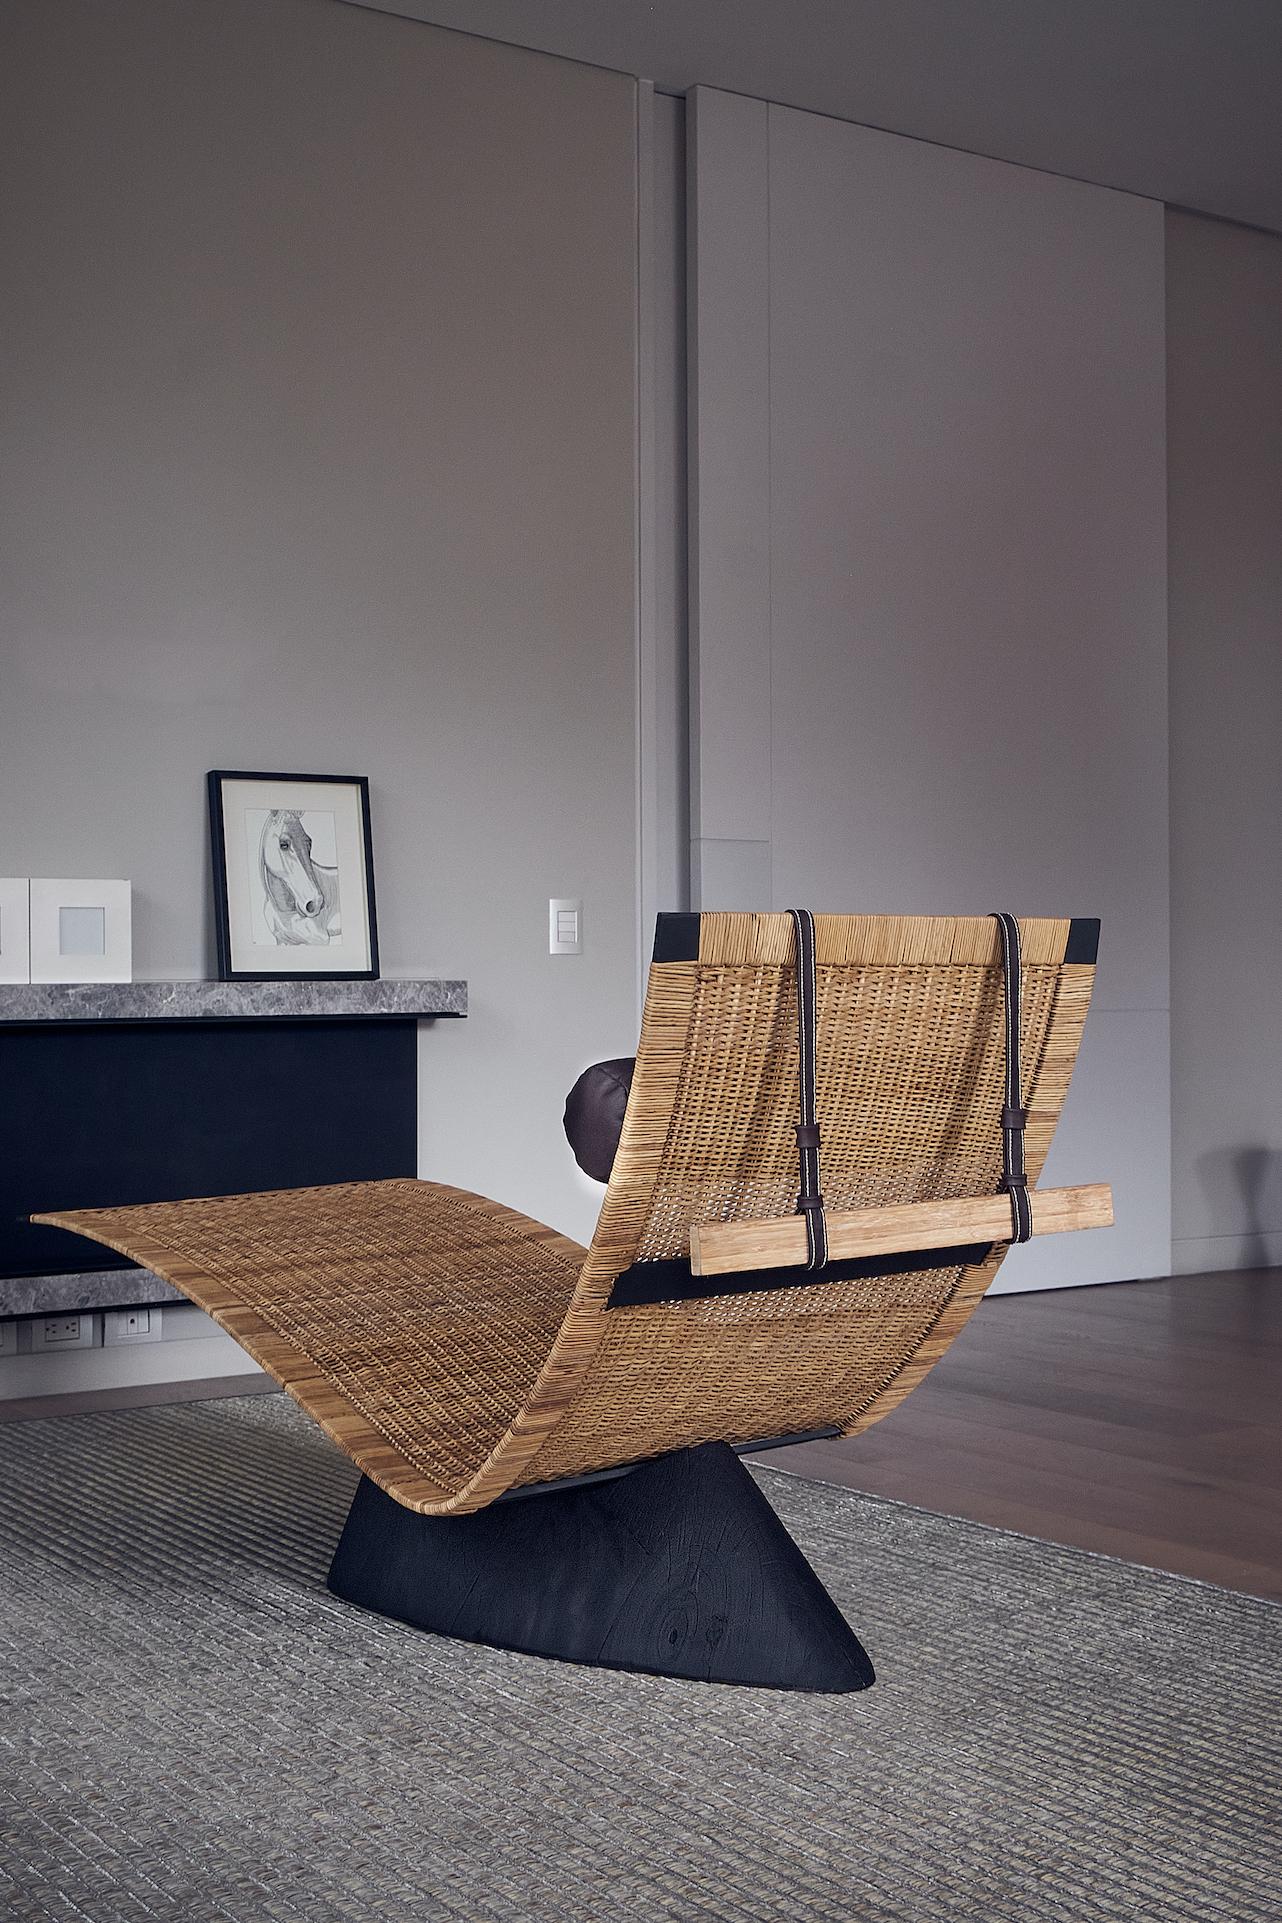 Chaise Longue Cherlon by Camilo Andres Rodriguez Marquez (aka CarmWorks)

Rattan / Burnt wood or natural

Each piece is made to order and hand crafted by the artist.

Dimensions: H. 84 x 152 x 65 cm

--

Camilo Andres Rodriguez Marquez is